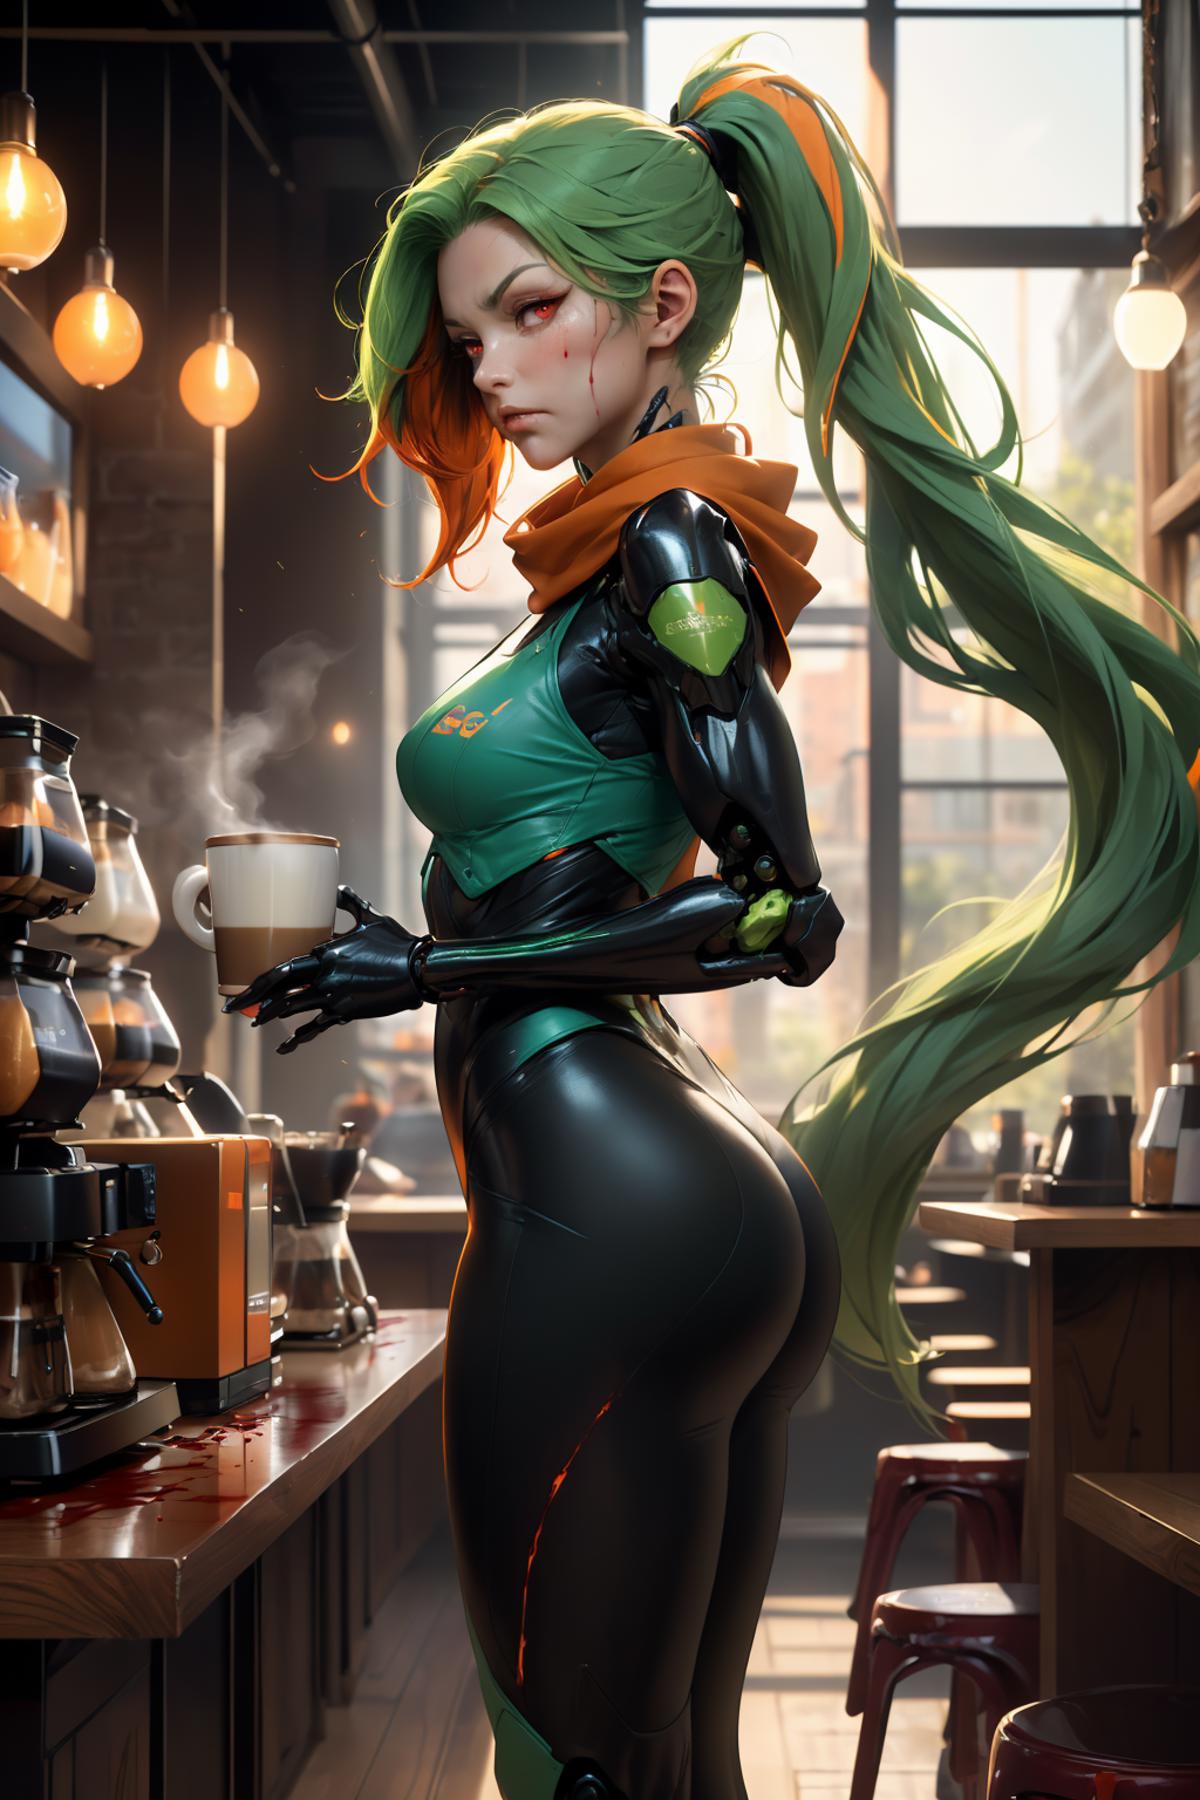 A woman in a green outfit holding a cup of coffee.